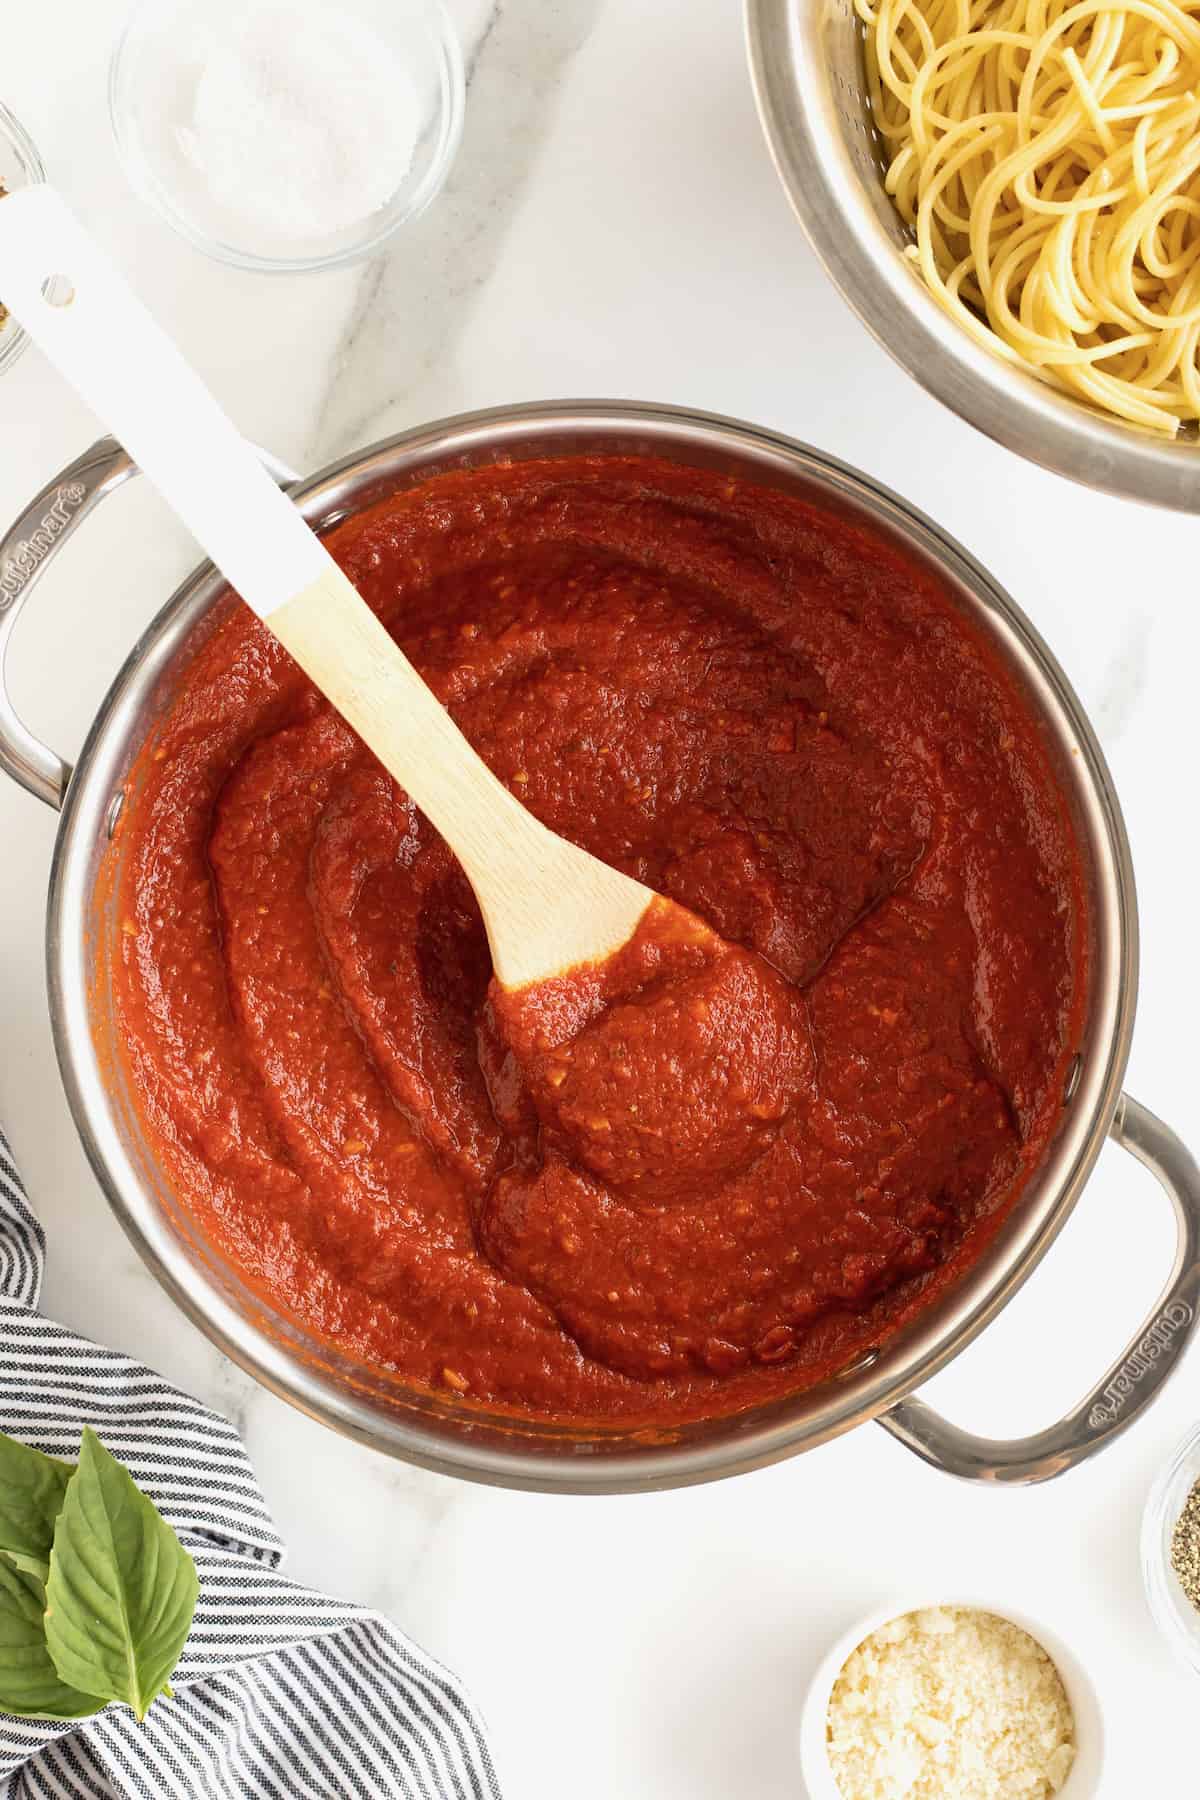 A large pot with red marinara sauce in it. A wooden spoon with a white handle is sticking out of the pot.